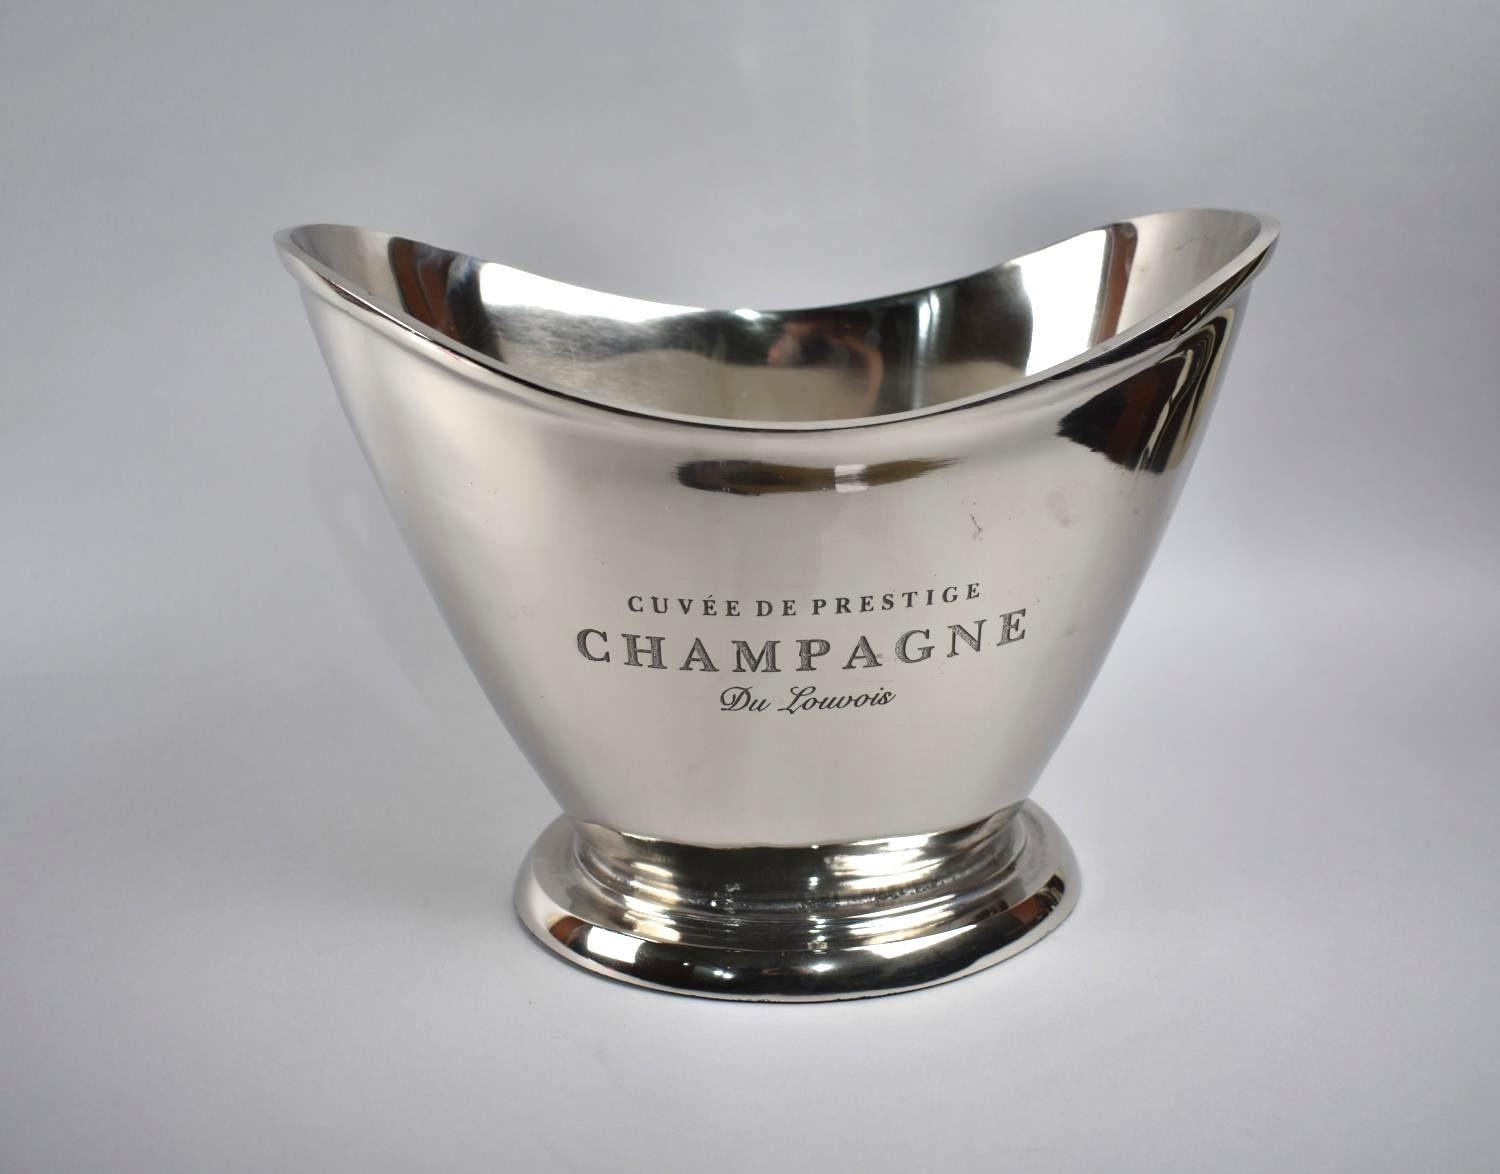 A Modern Silver Plated Two Handled Champagne Cooler, For "Cuvée De Prestige Champagne Louvois", 35cm